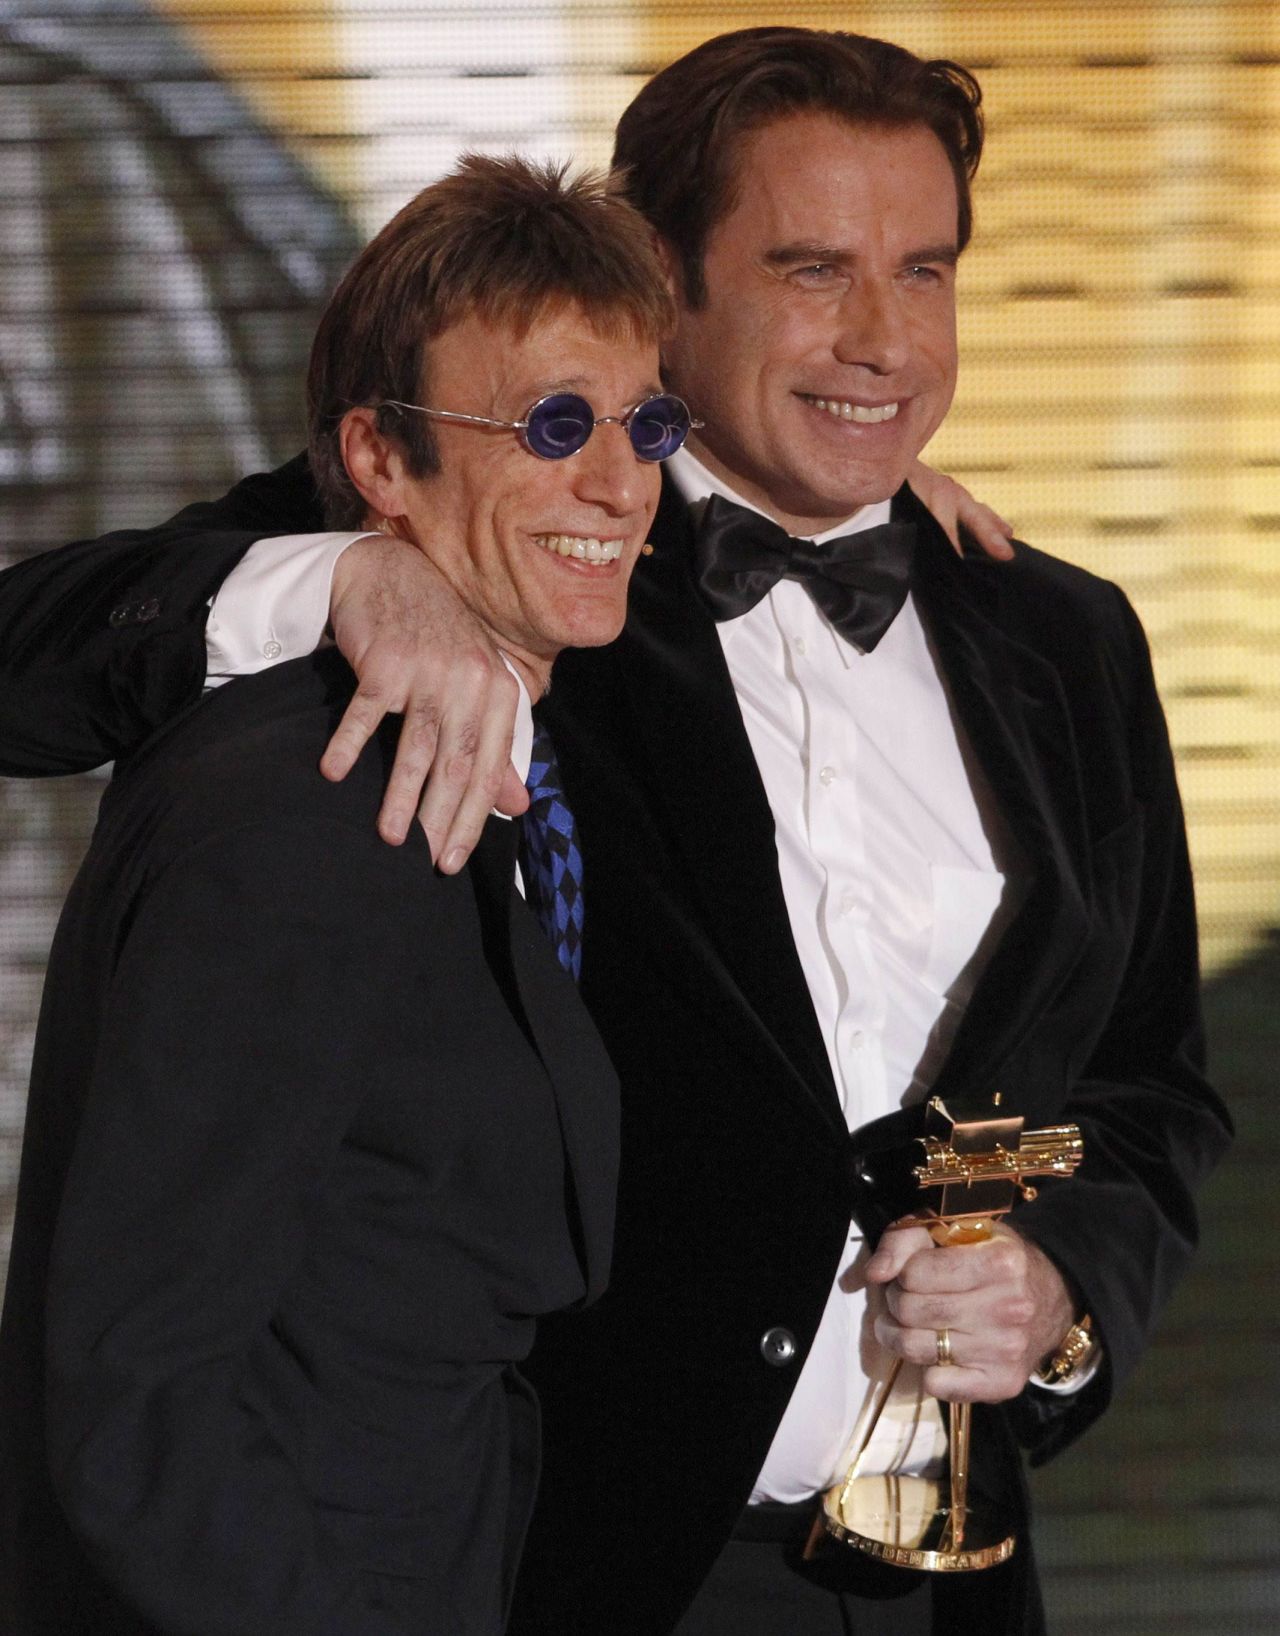 Robin Gibb and John Travolta pose after Gibb announced Travolta as the winner of a Golden Camera media prize in Berlin in February 2010.